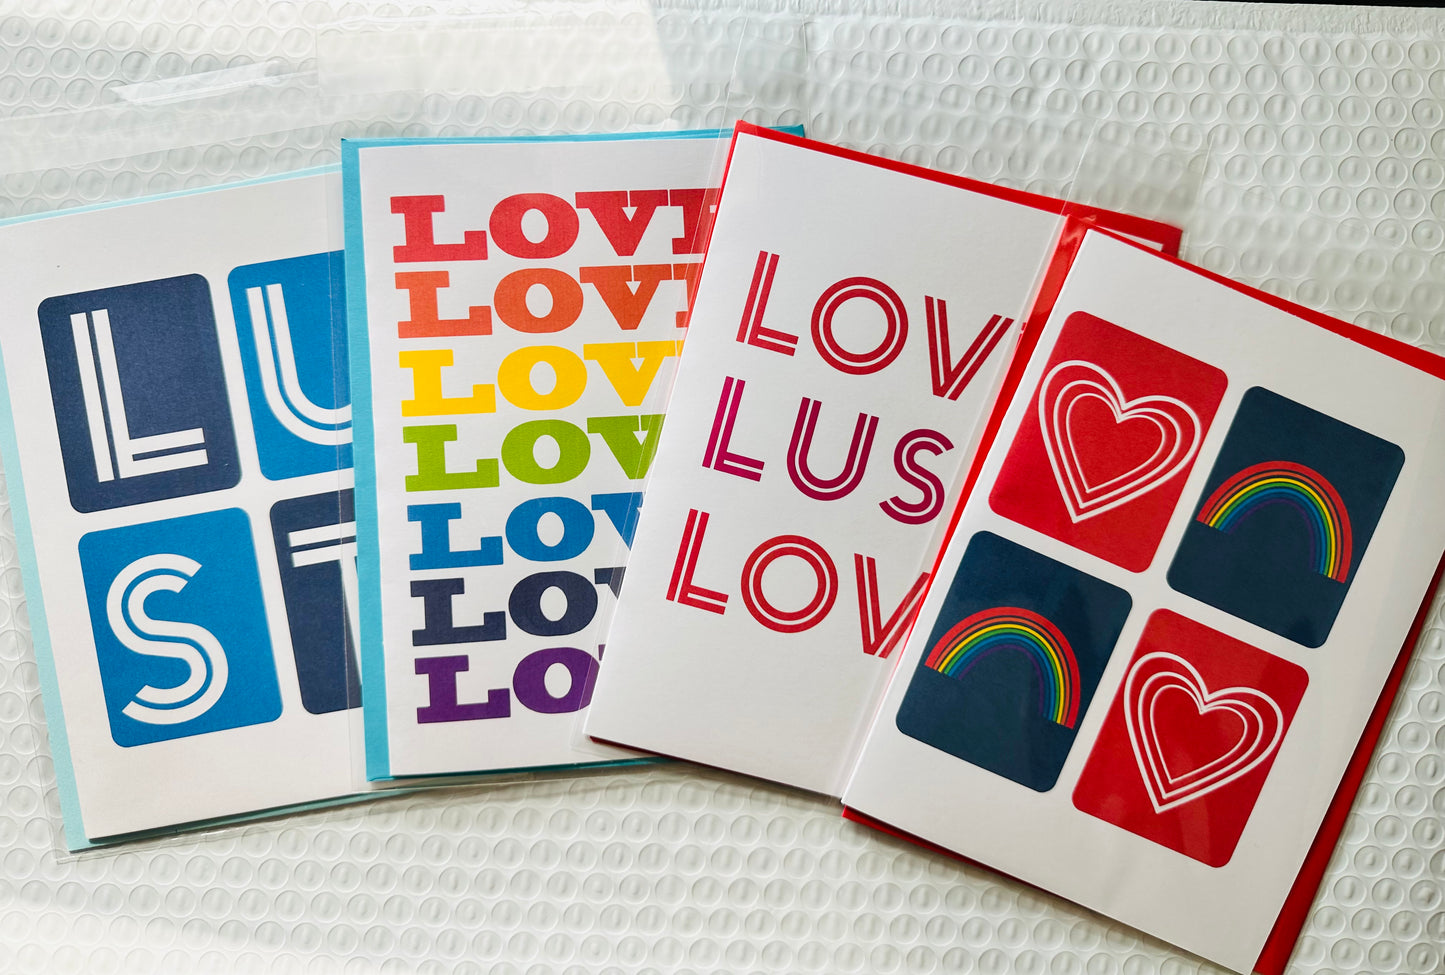 LUST Boxes Any occasion Greeting Card 5x7 Sassy fun!